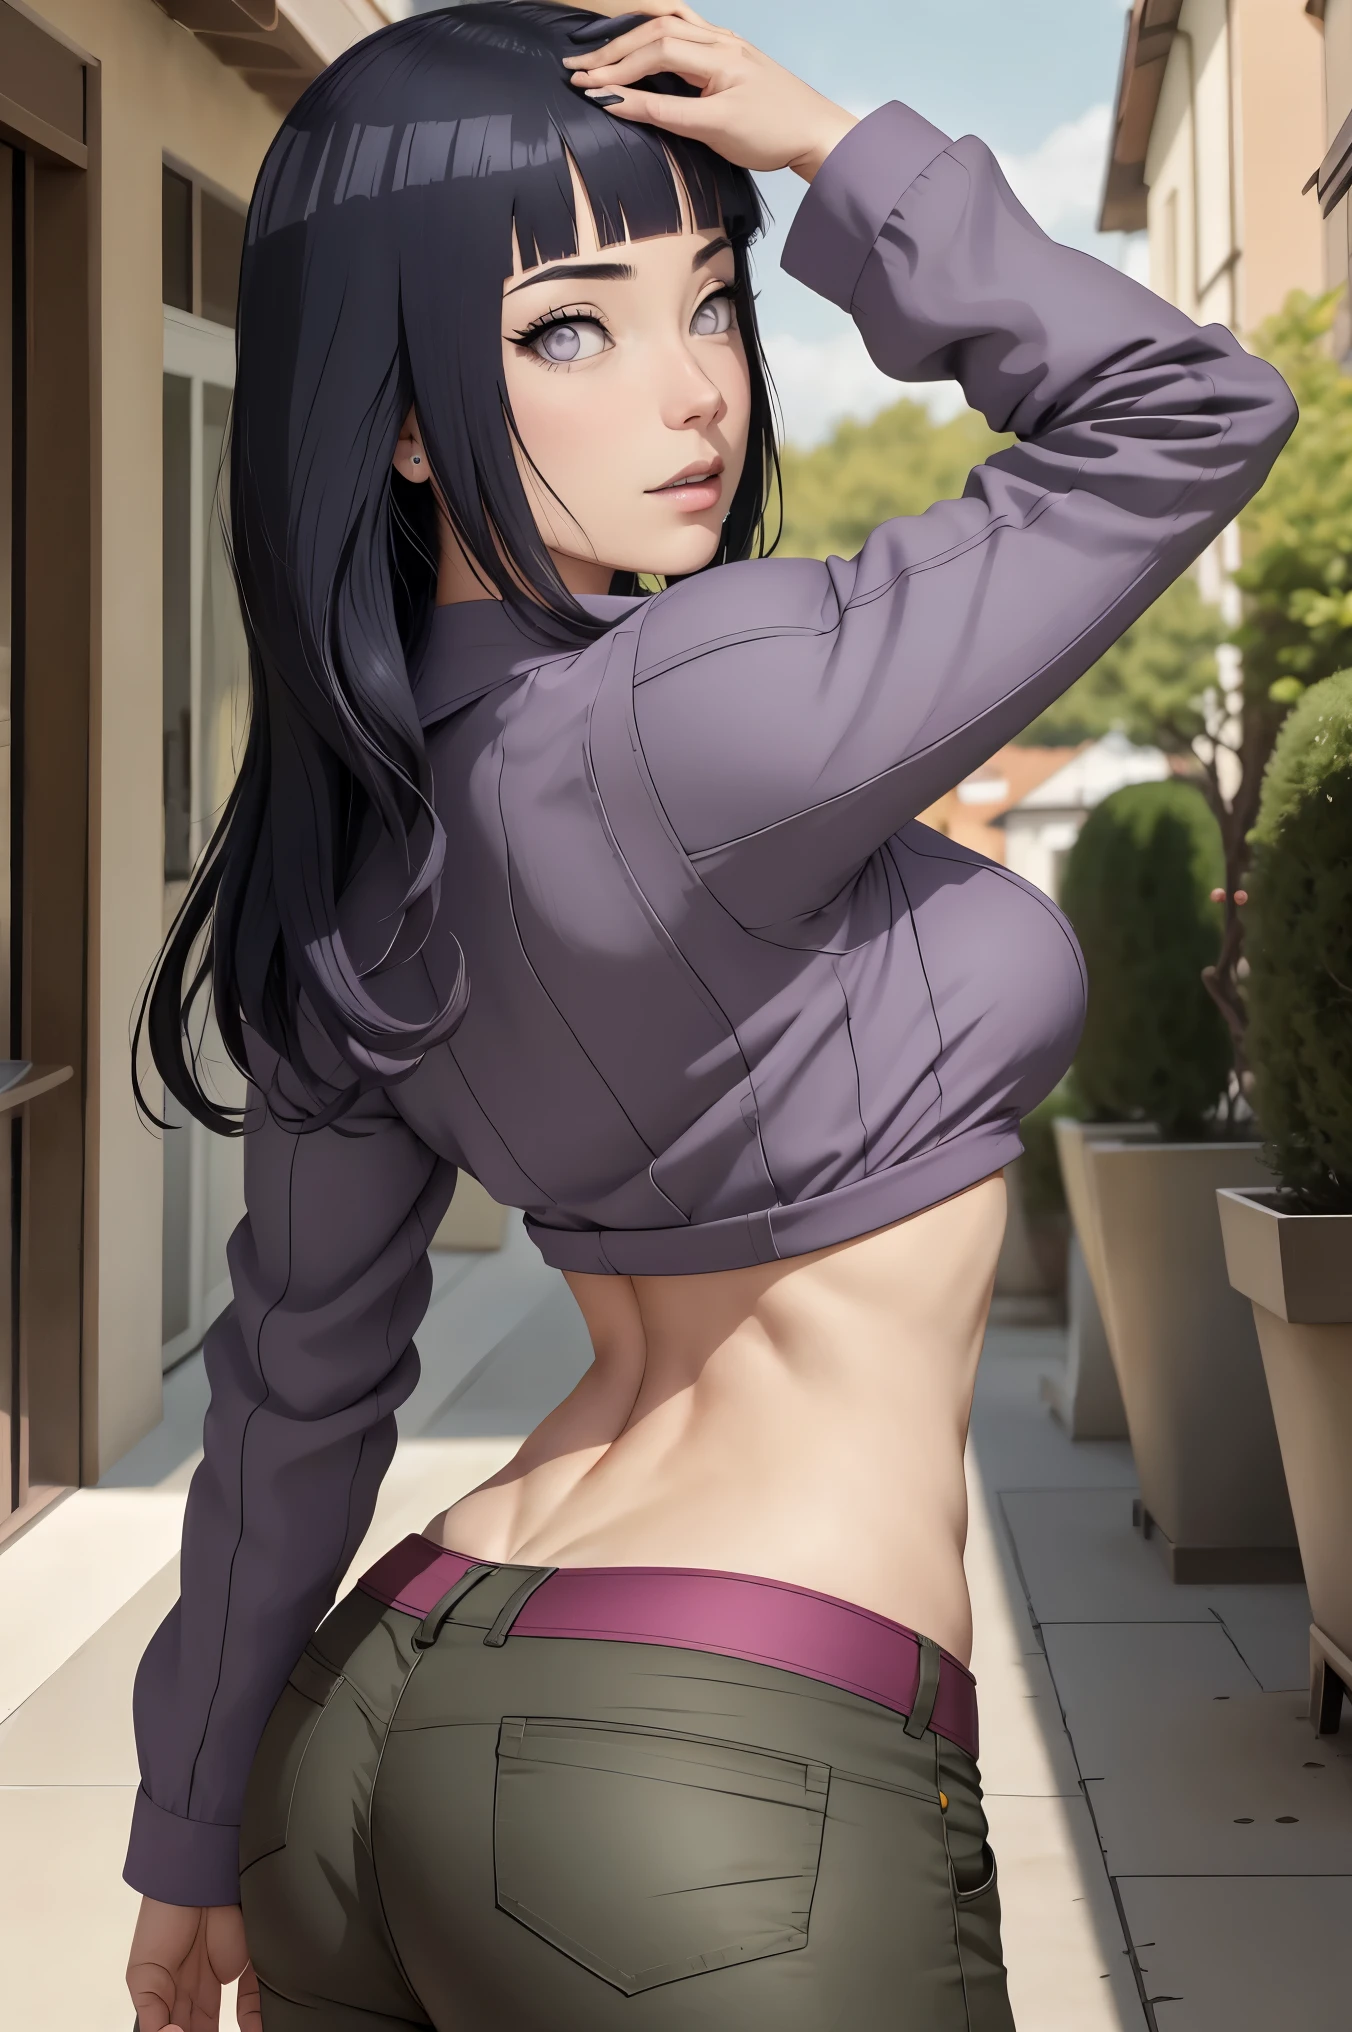 master part, absurdities, hinata\(boruto\), 1 girl, Alone,mature female, purple hood,layered sleeves, Brown jeans, outdoor, cloudy sky, perfect composition, detailed lips, big breasted, beautiful face, body proportion, blush, (pink lips), short black hair (black fur), lilac eyes, soft look, super realistic, detailed, Photoshoot, realistic face and body, realistic hair, realistic eyes, realistic nose, realistic lips, Brown jeans, cheered up, dancing lightly. on your back, with chin under shoulder, looking back sensually, sexy smile, Closed mouth. different pose.